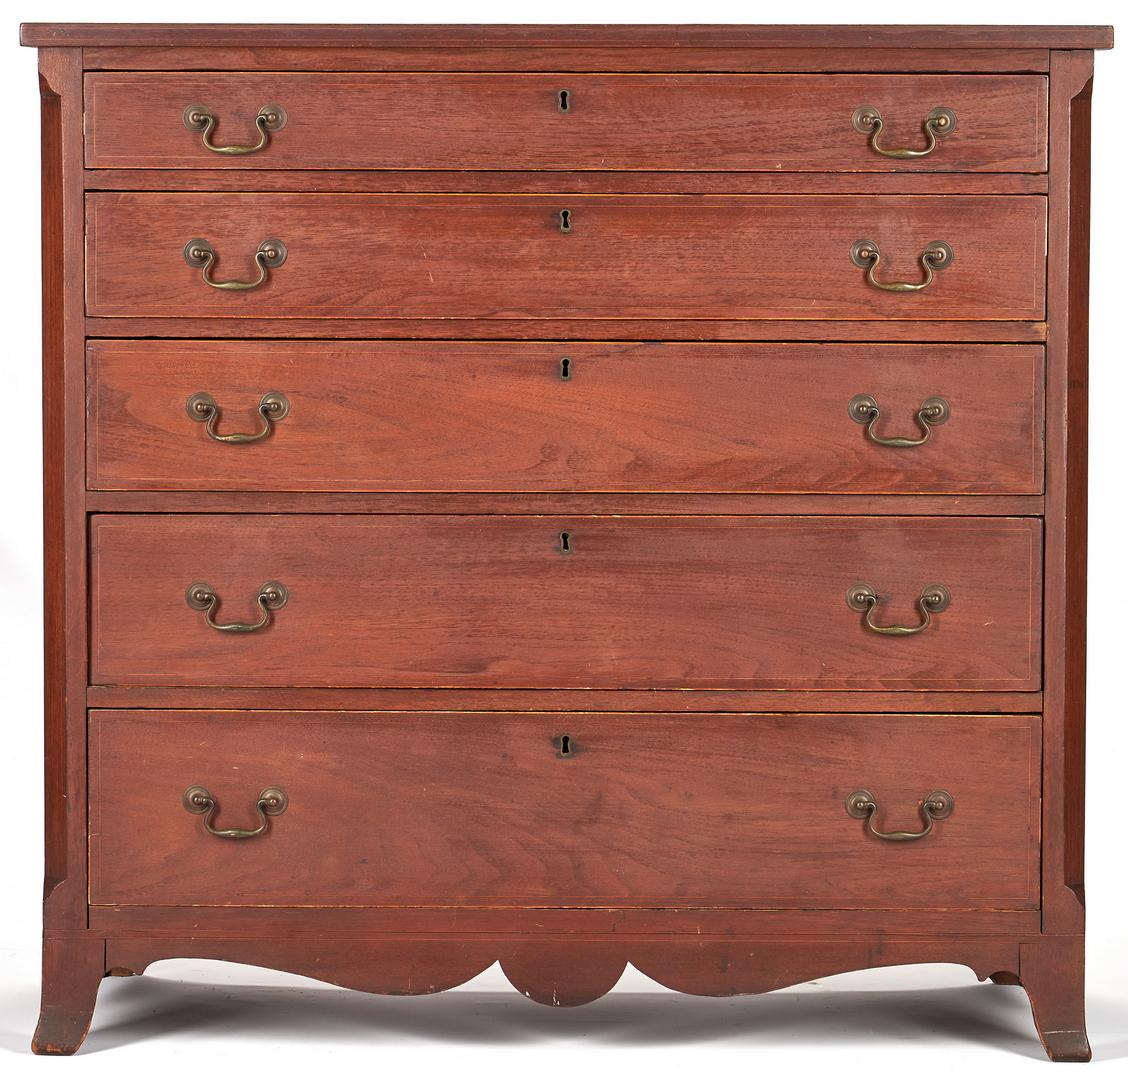 Federal Inlaid Hepplewhite Chest of Drawers - Image 28 of 28